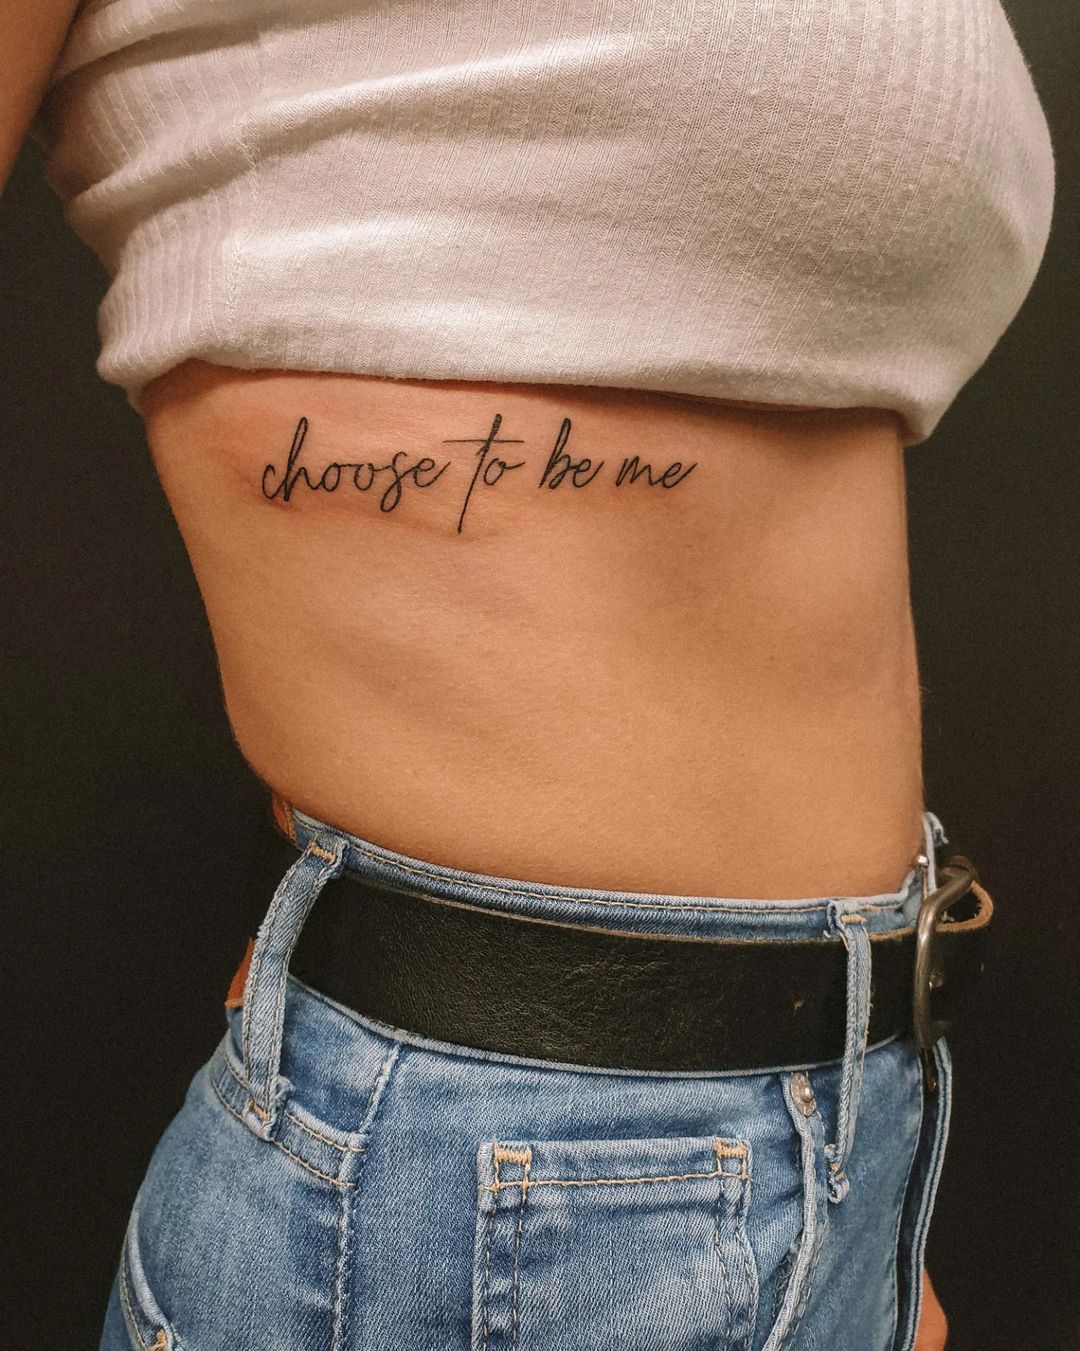 44 Meaningful Quote Tattoos to Memorize Your Special Moments - Hairstylery